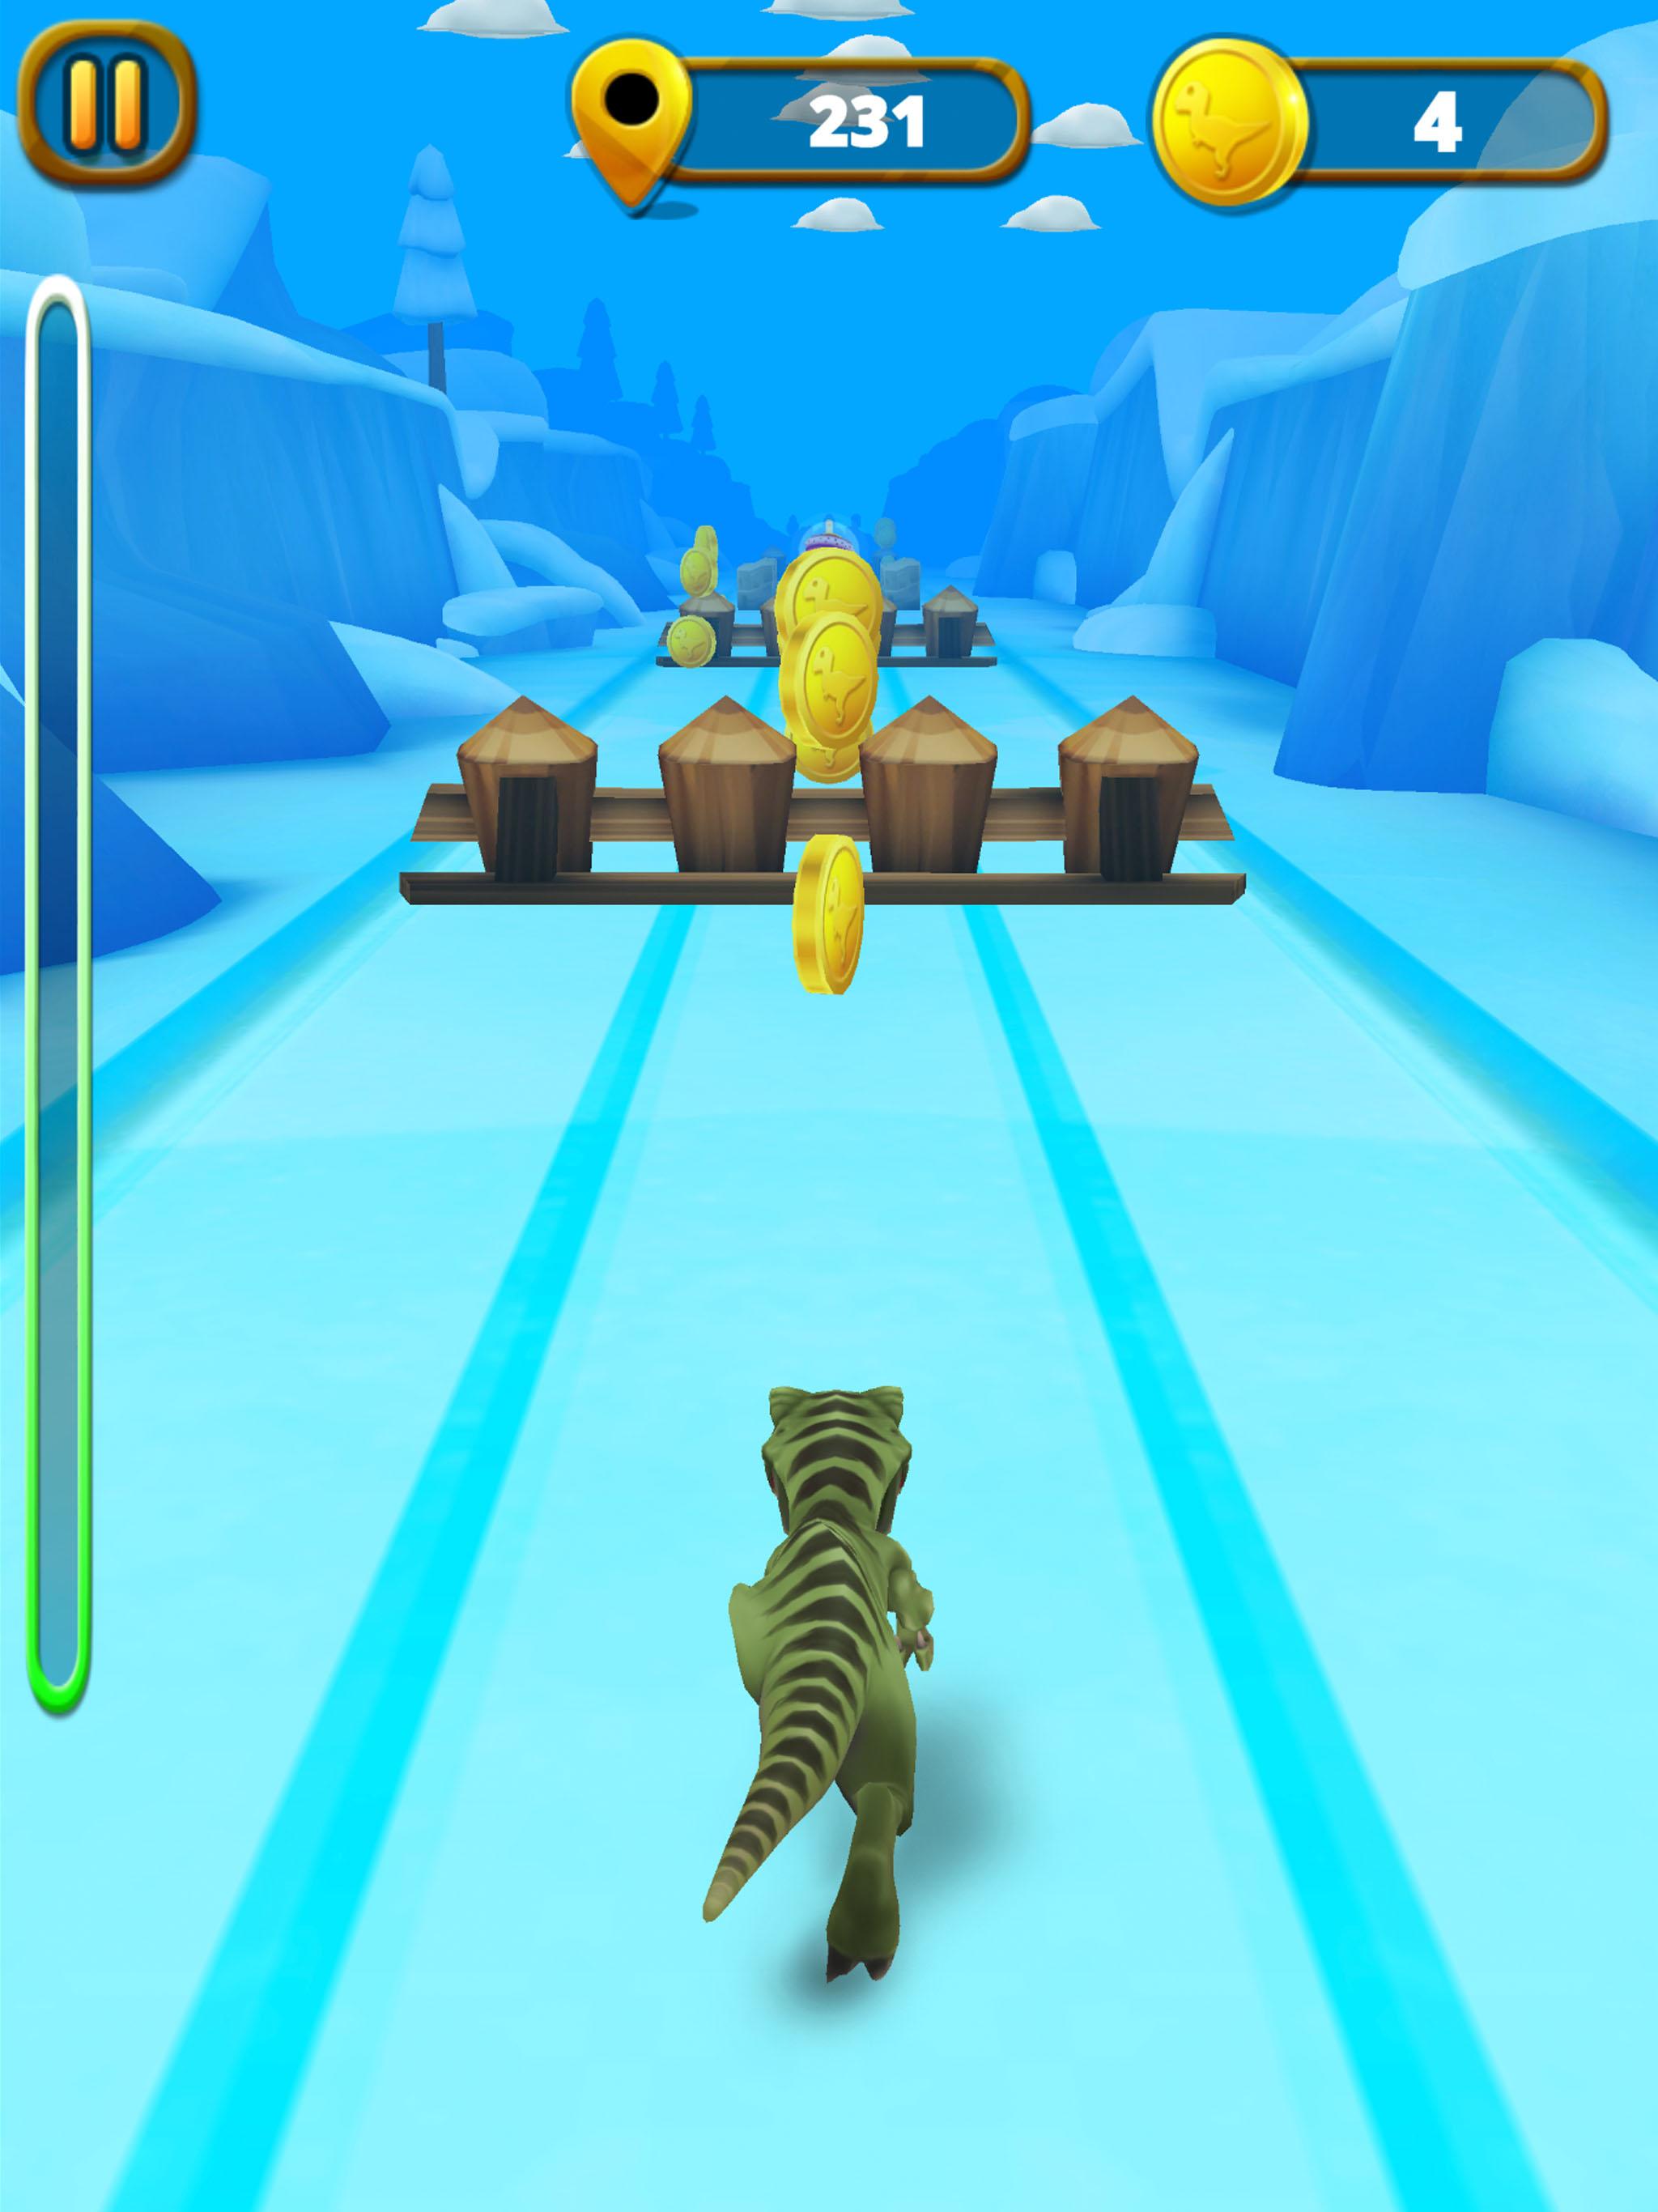 Download and play Dino Run 3D on PC with MuMu Player